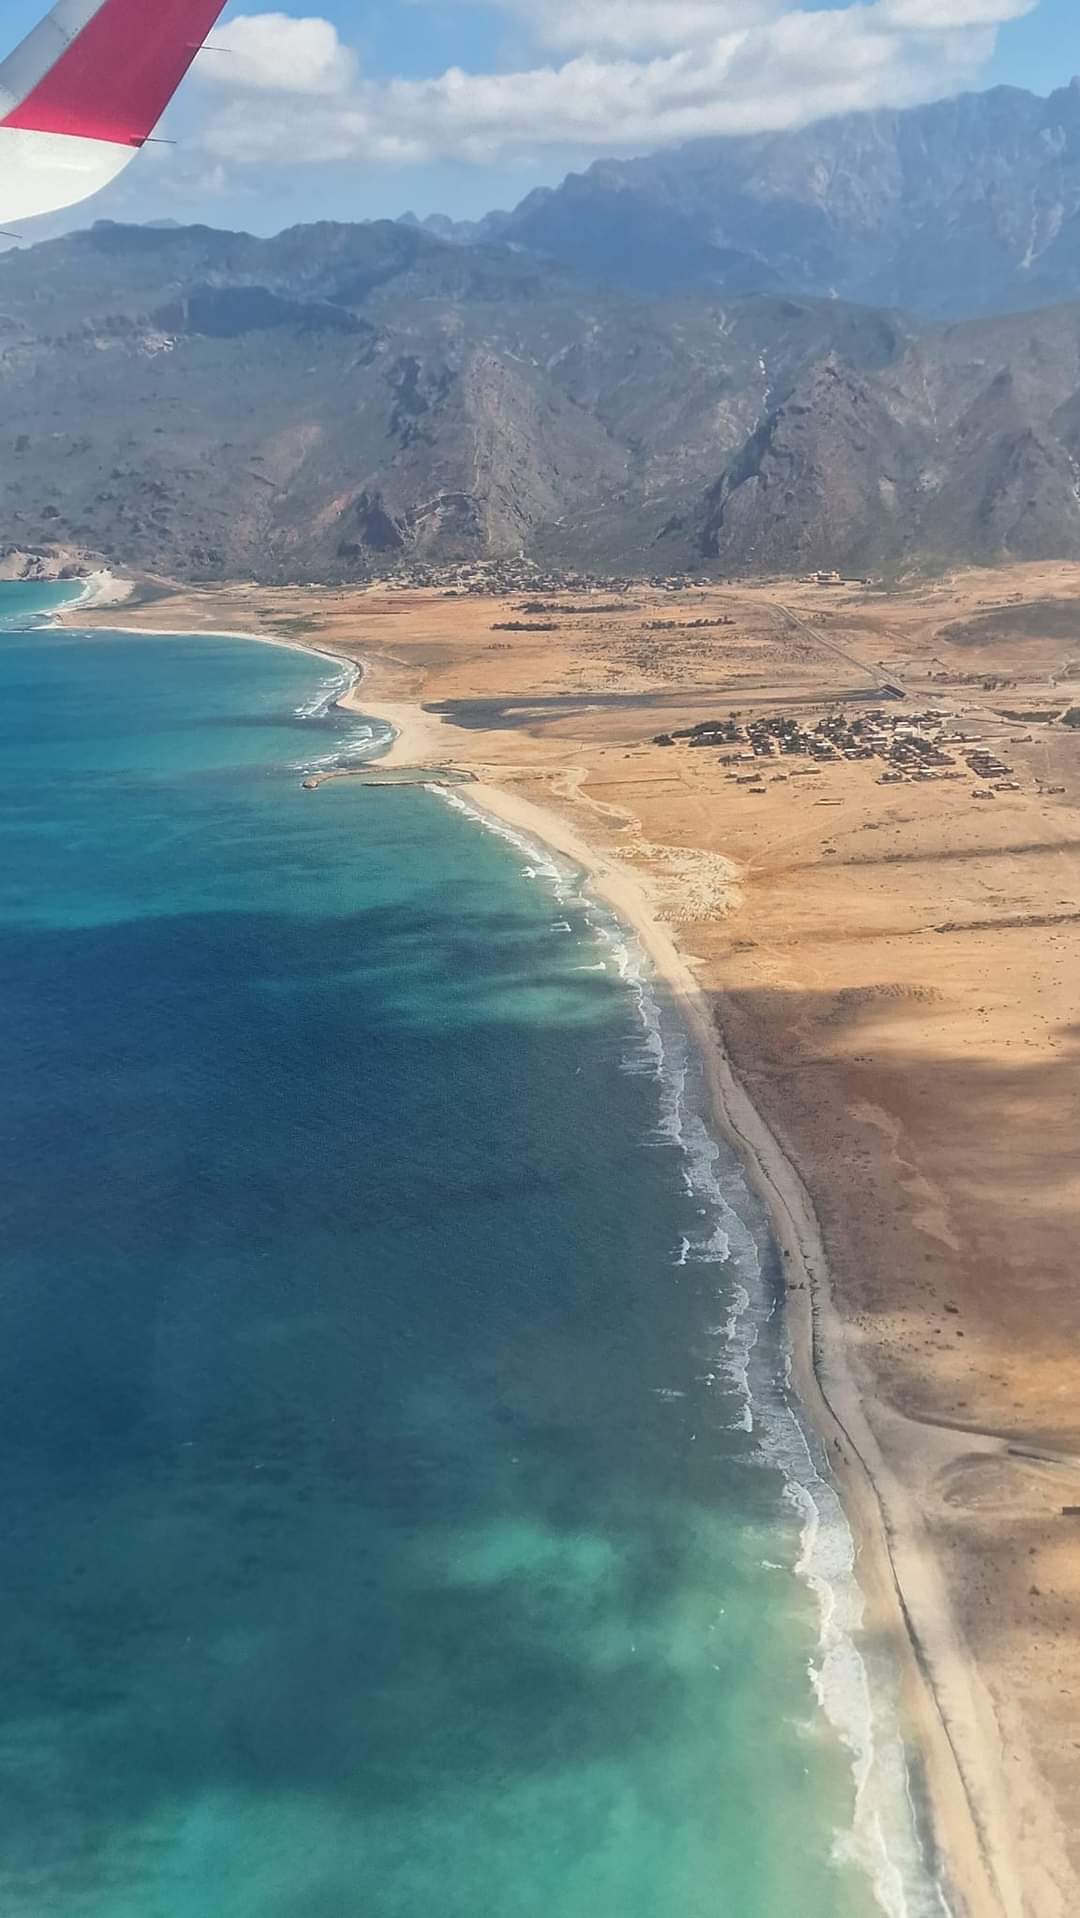 View of Socotra from the plane